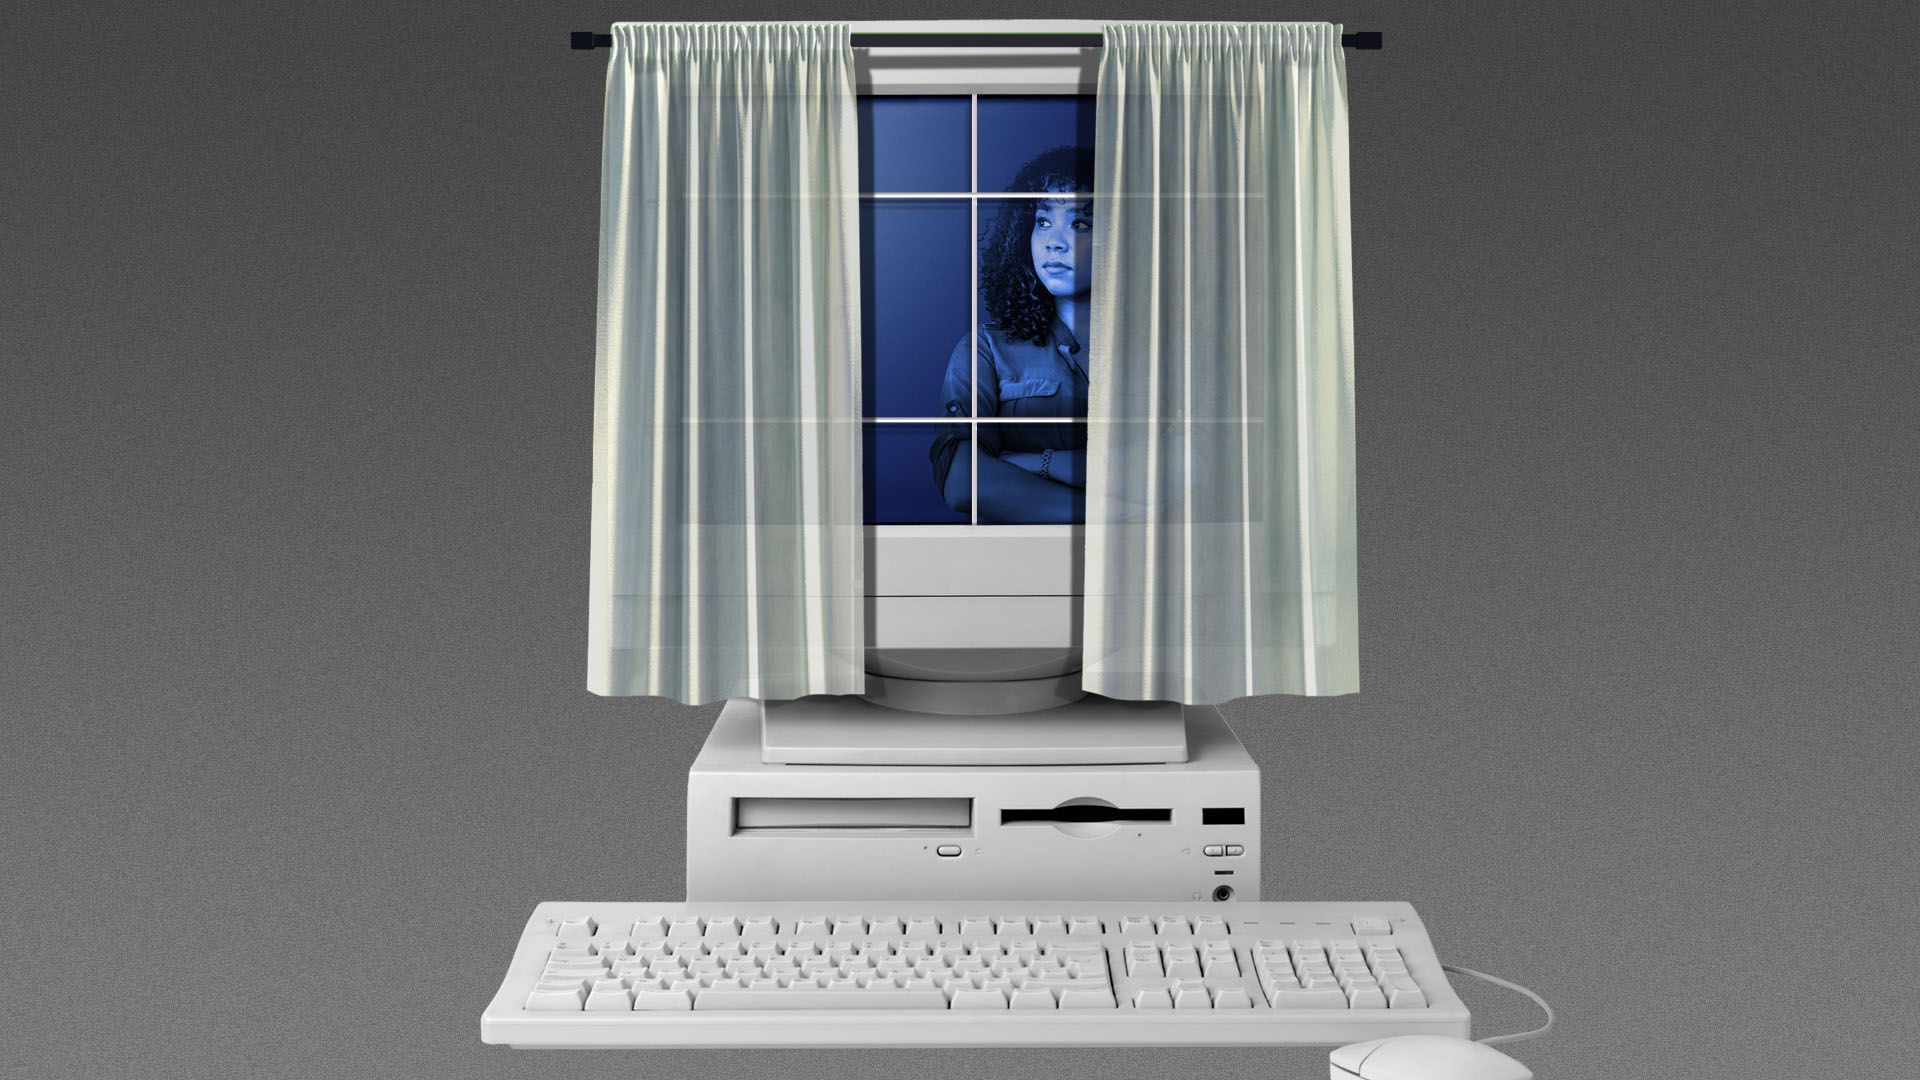 Illustration of a woman looking out a window with open curtains build into a computer screen